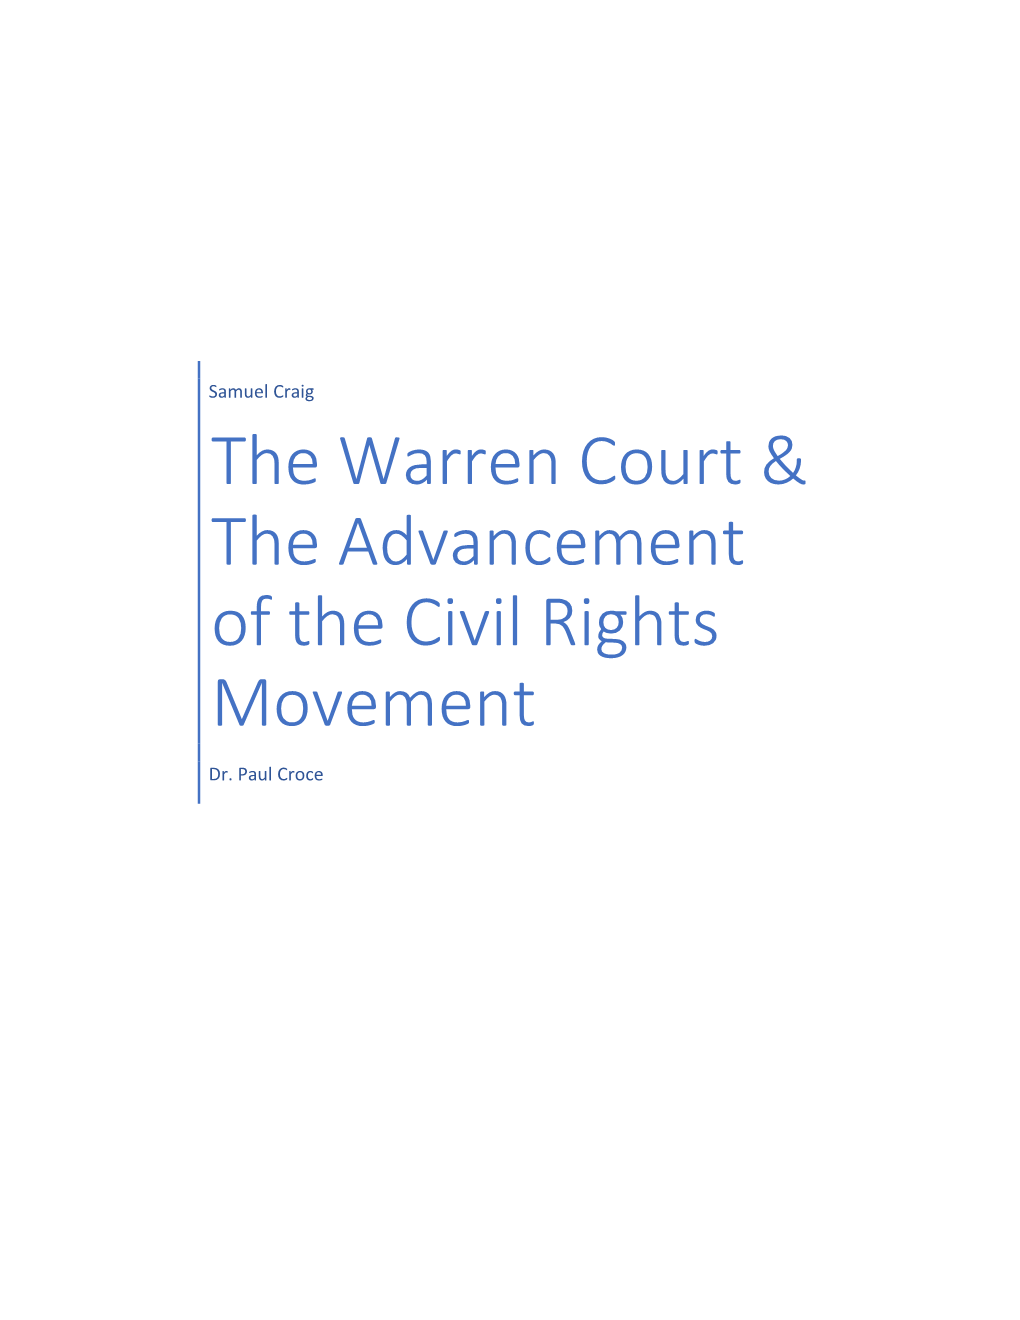 The Warren Court's Advancing of Civil Rights, and Expansion of Federal